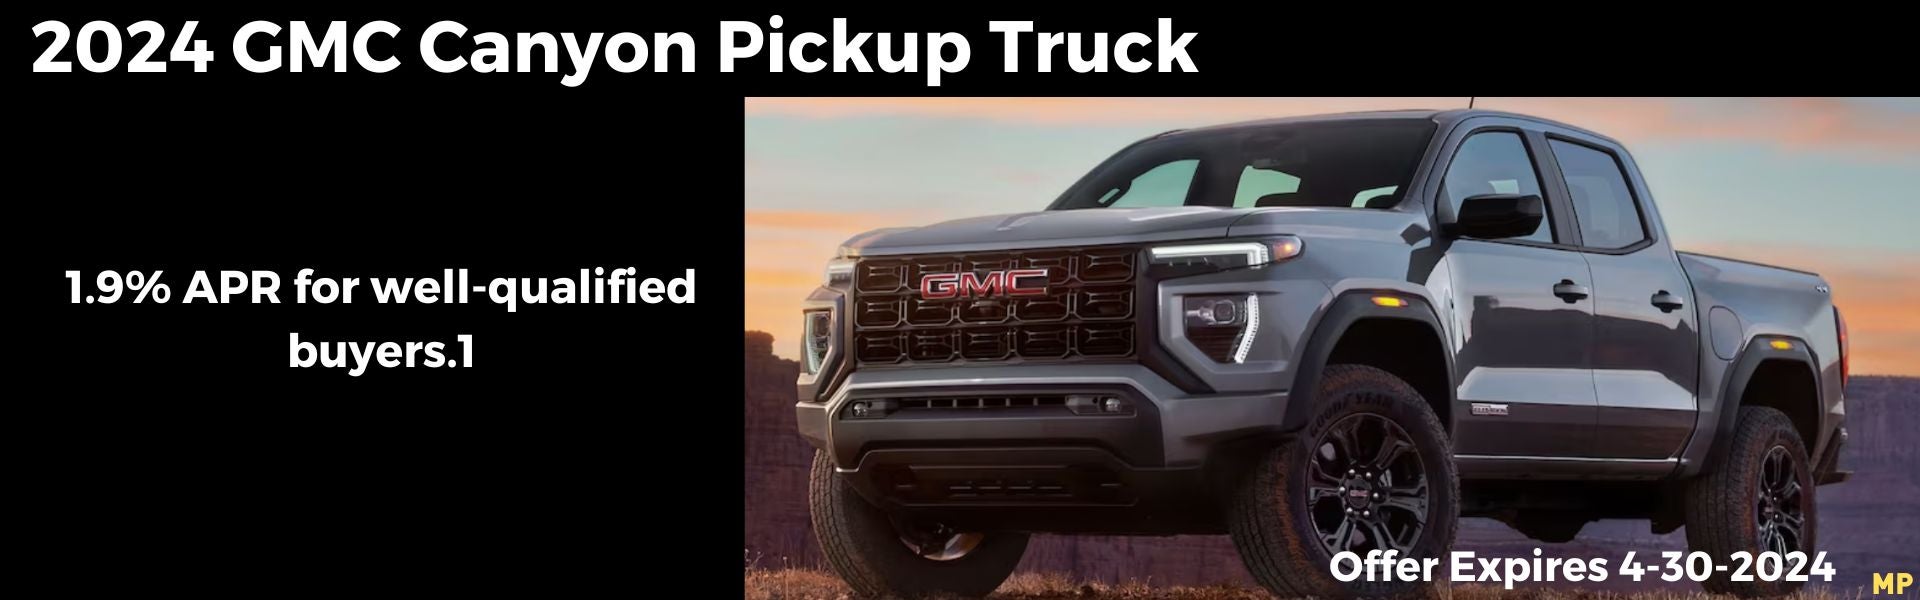 2023 GMC Canyon Reveal - Coming soon!